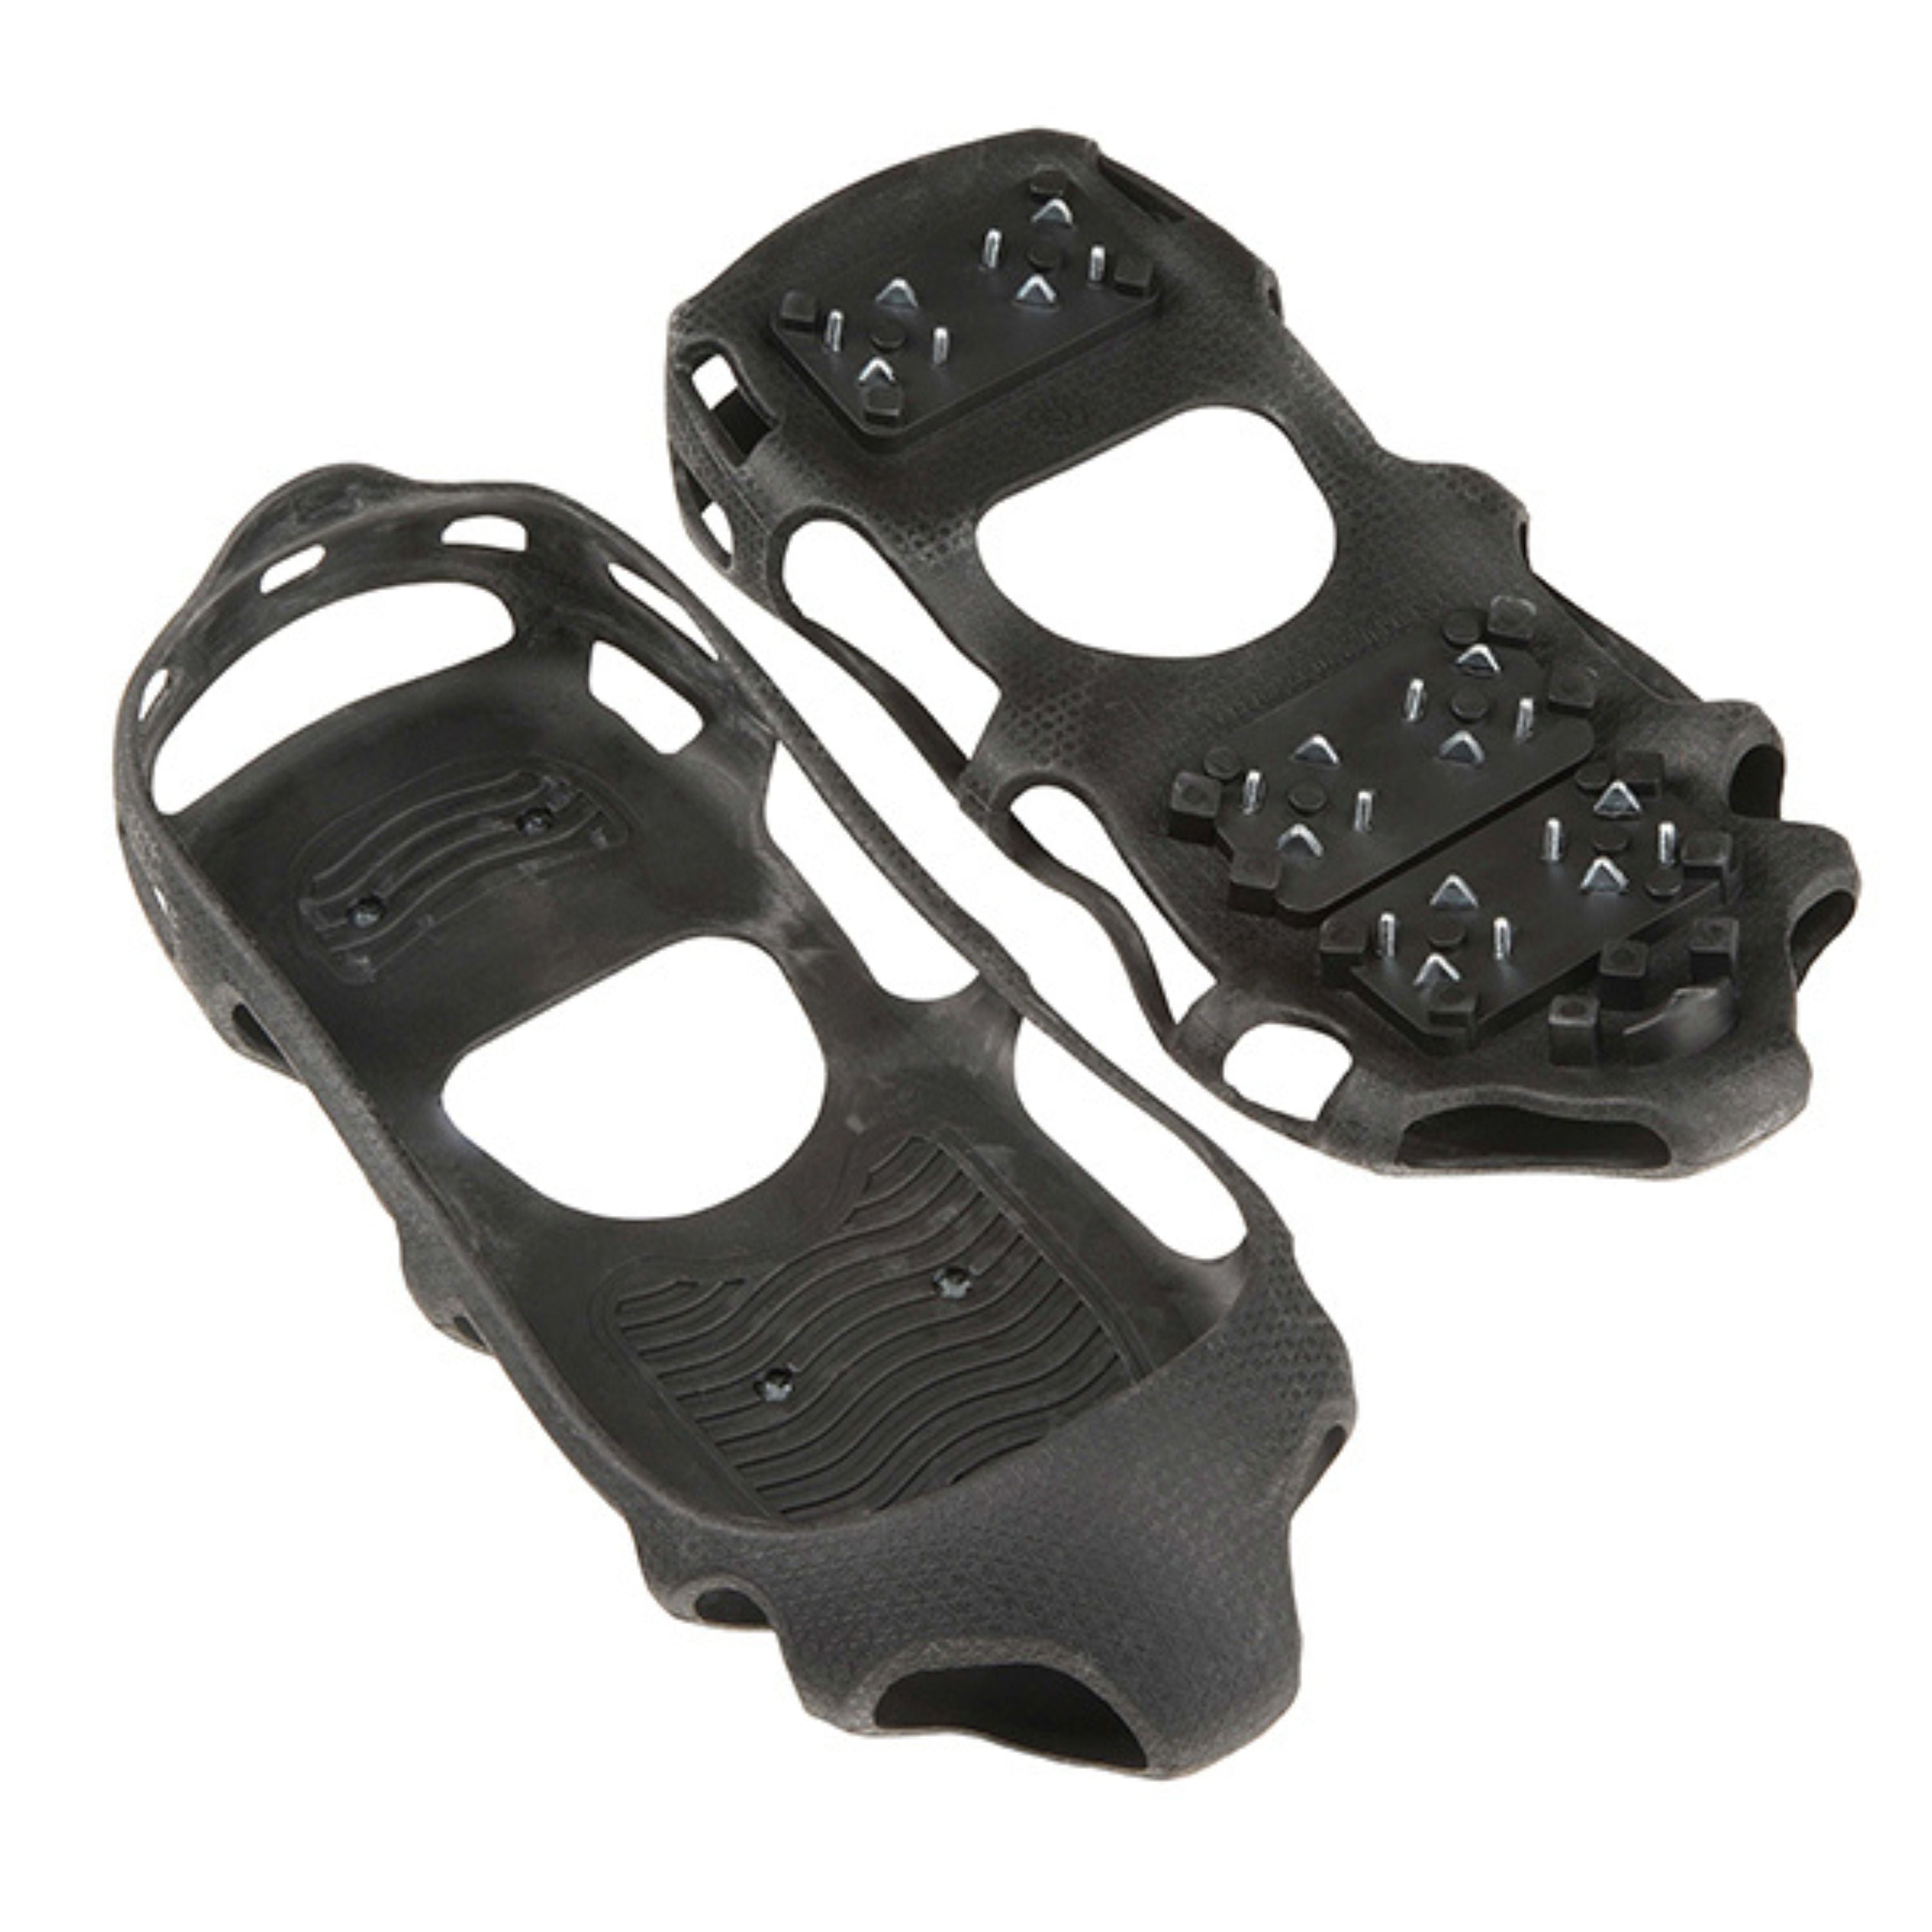 Crampons "Traction"